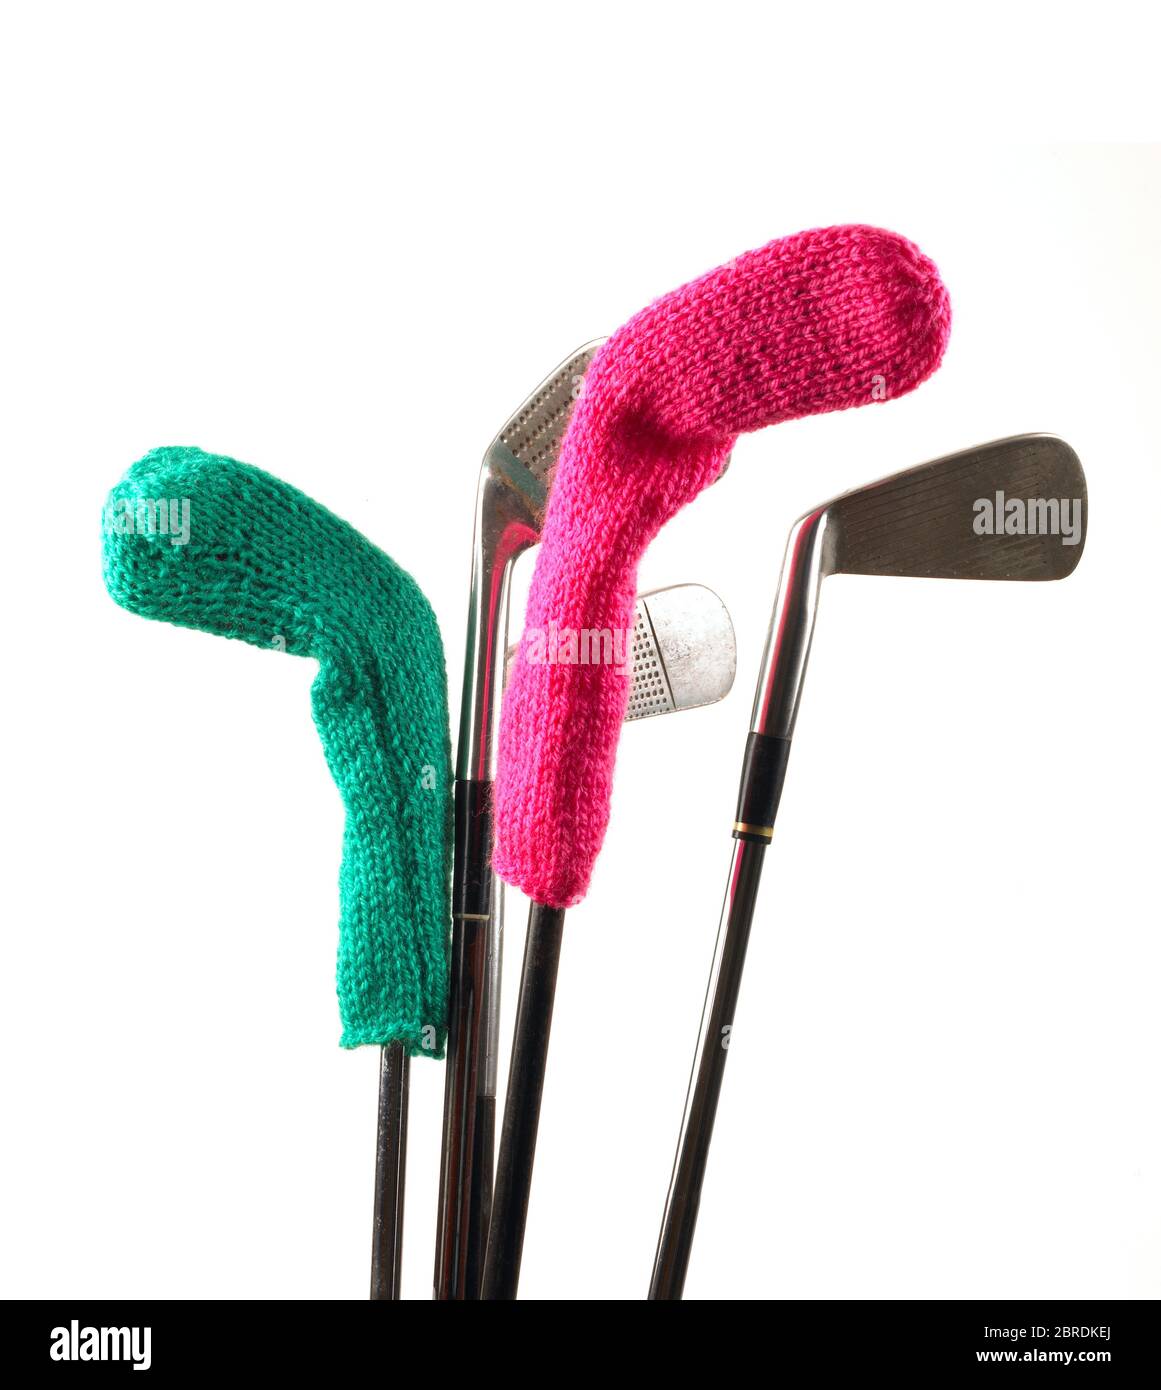 Golf Clubs with green and pink knitted woollen golf club covers on a white background Stock Photo